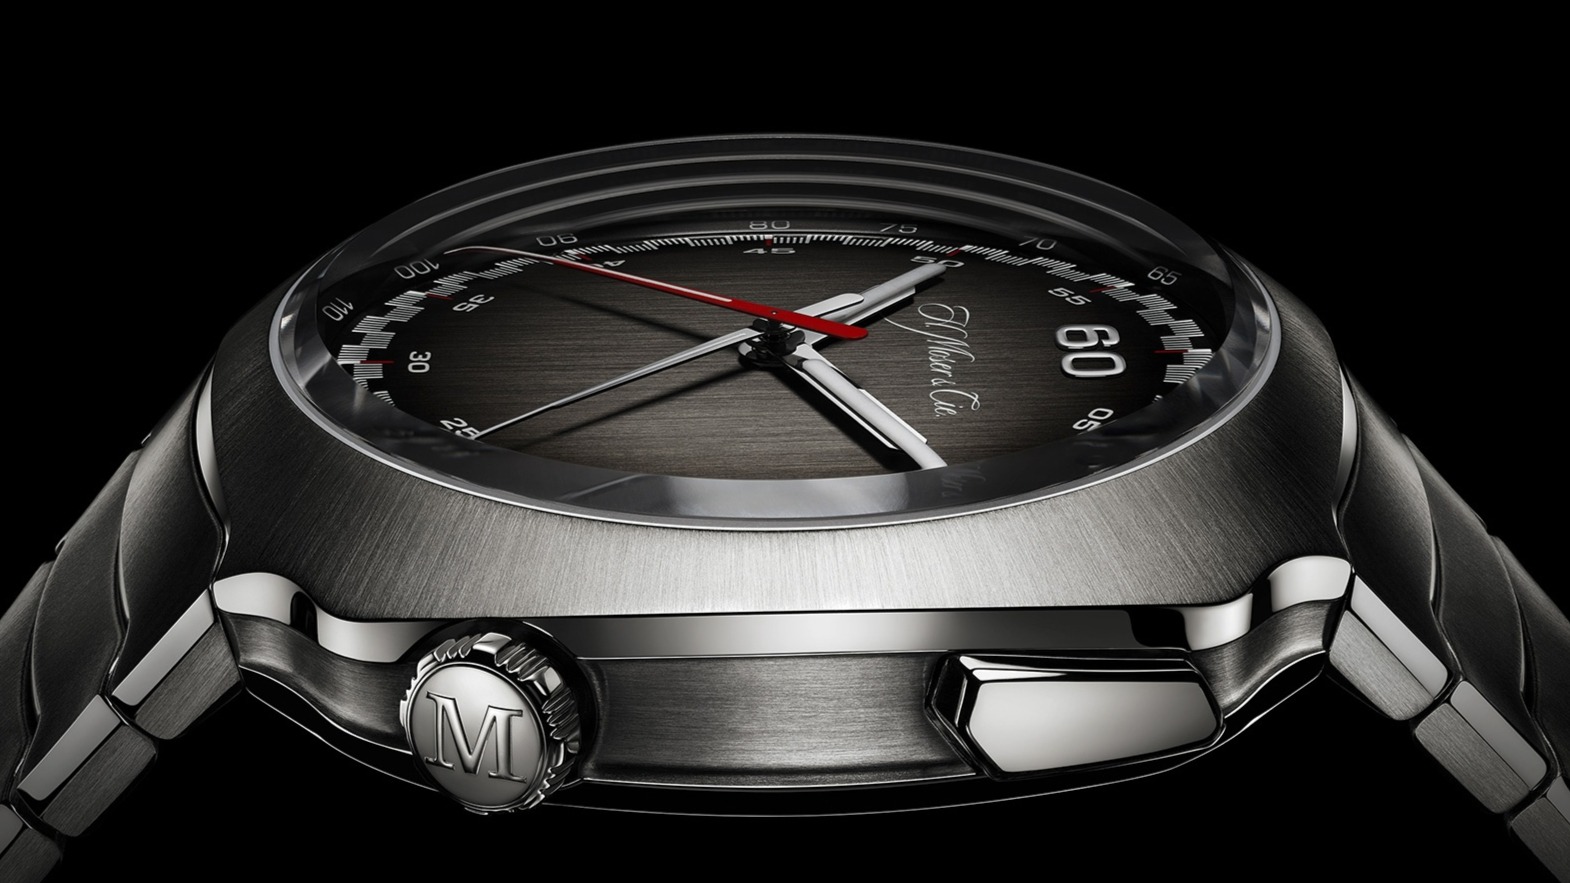 Starting the new year with a bang: H. Moser & Cie. Streamliner